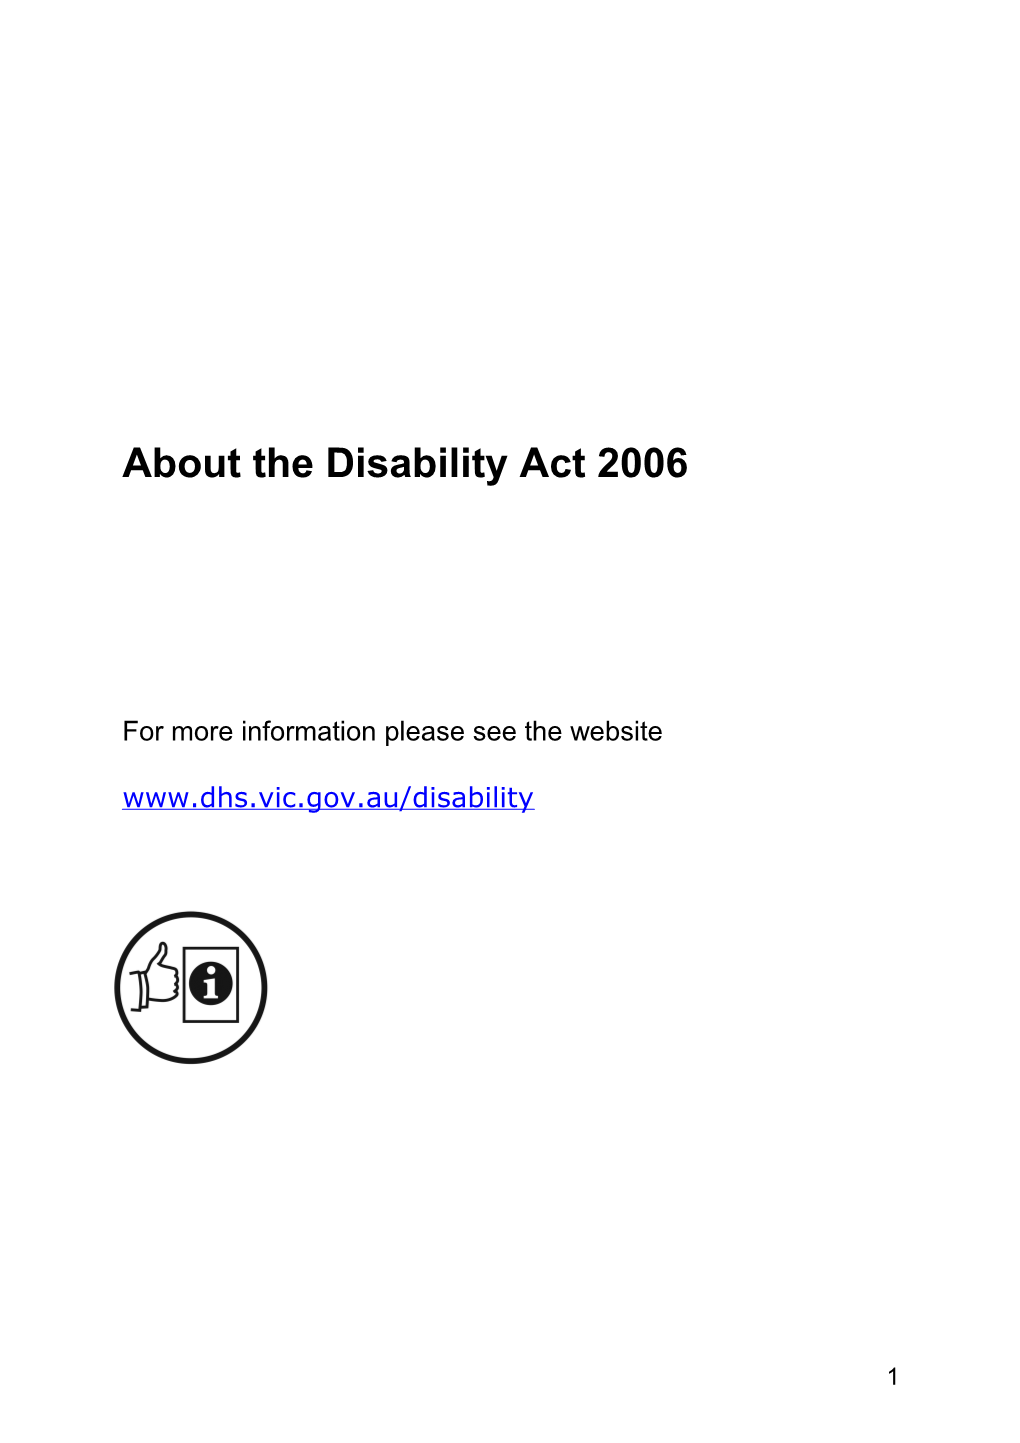 About the Disability Act 2006 Easy Read